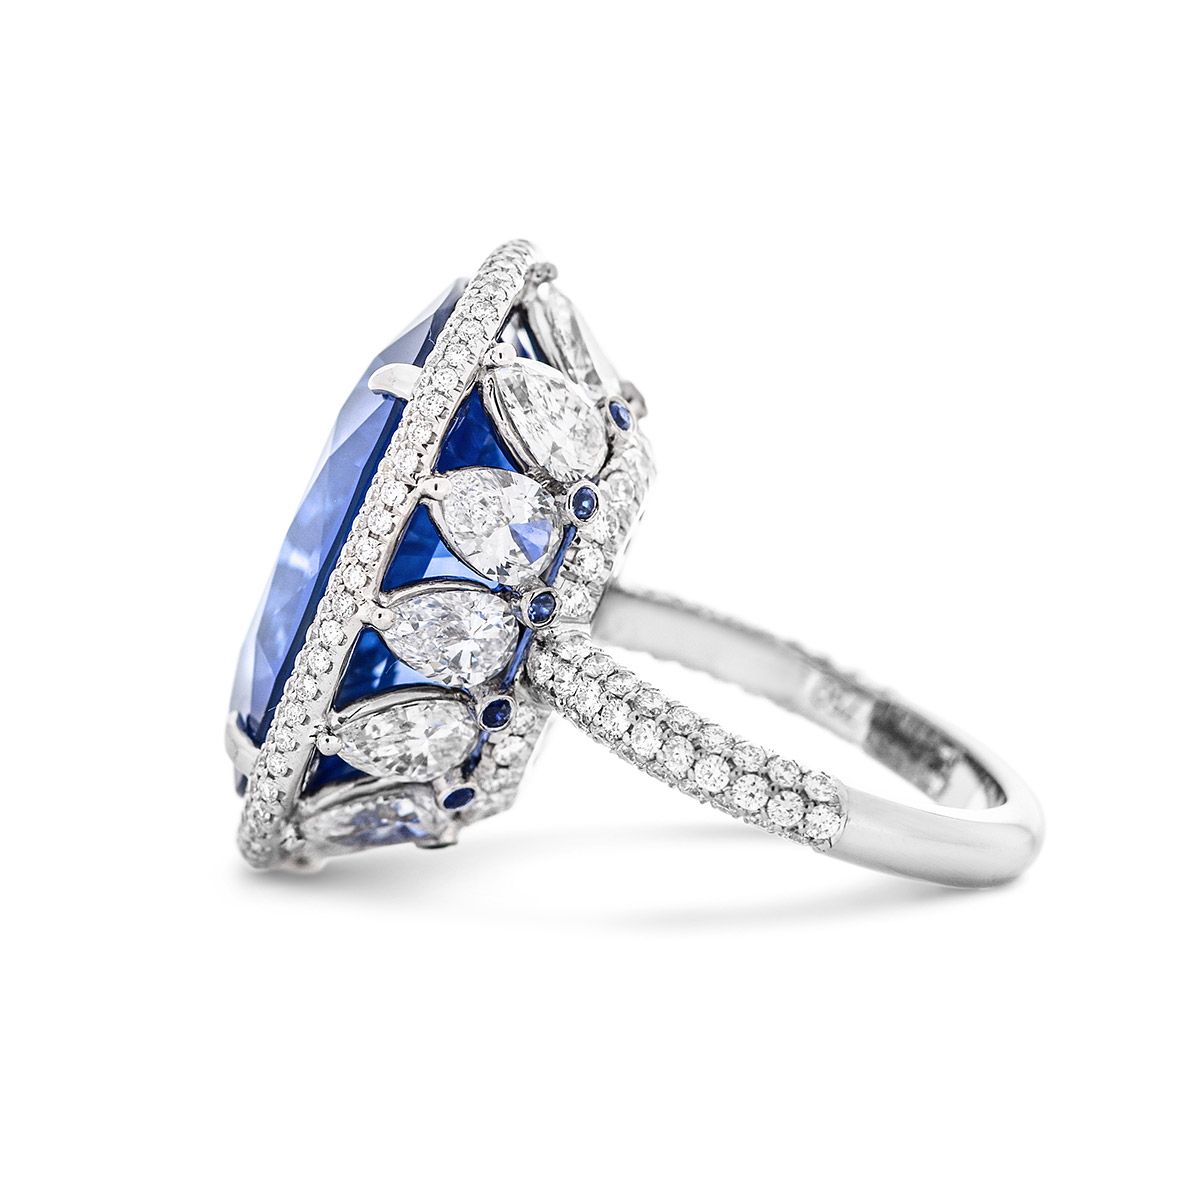 Natural Blue Sri-Lanka Sapphire Ring, 32.35 Ct. TW, GRS Certified, GRS2015-102428, Unheated